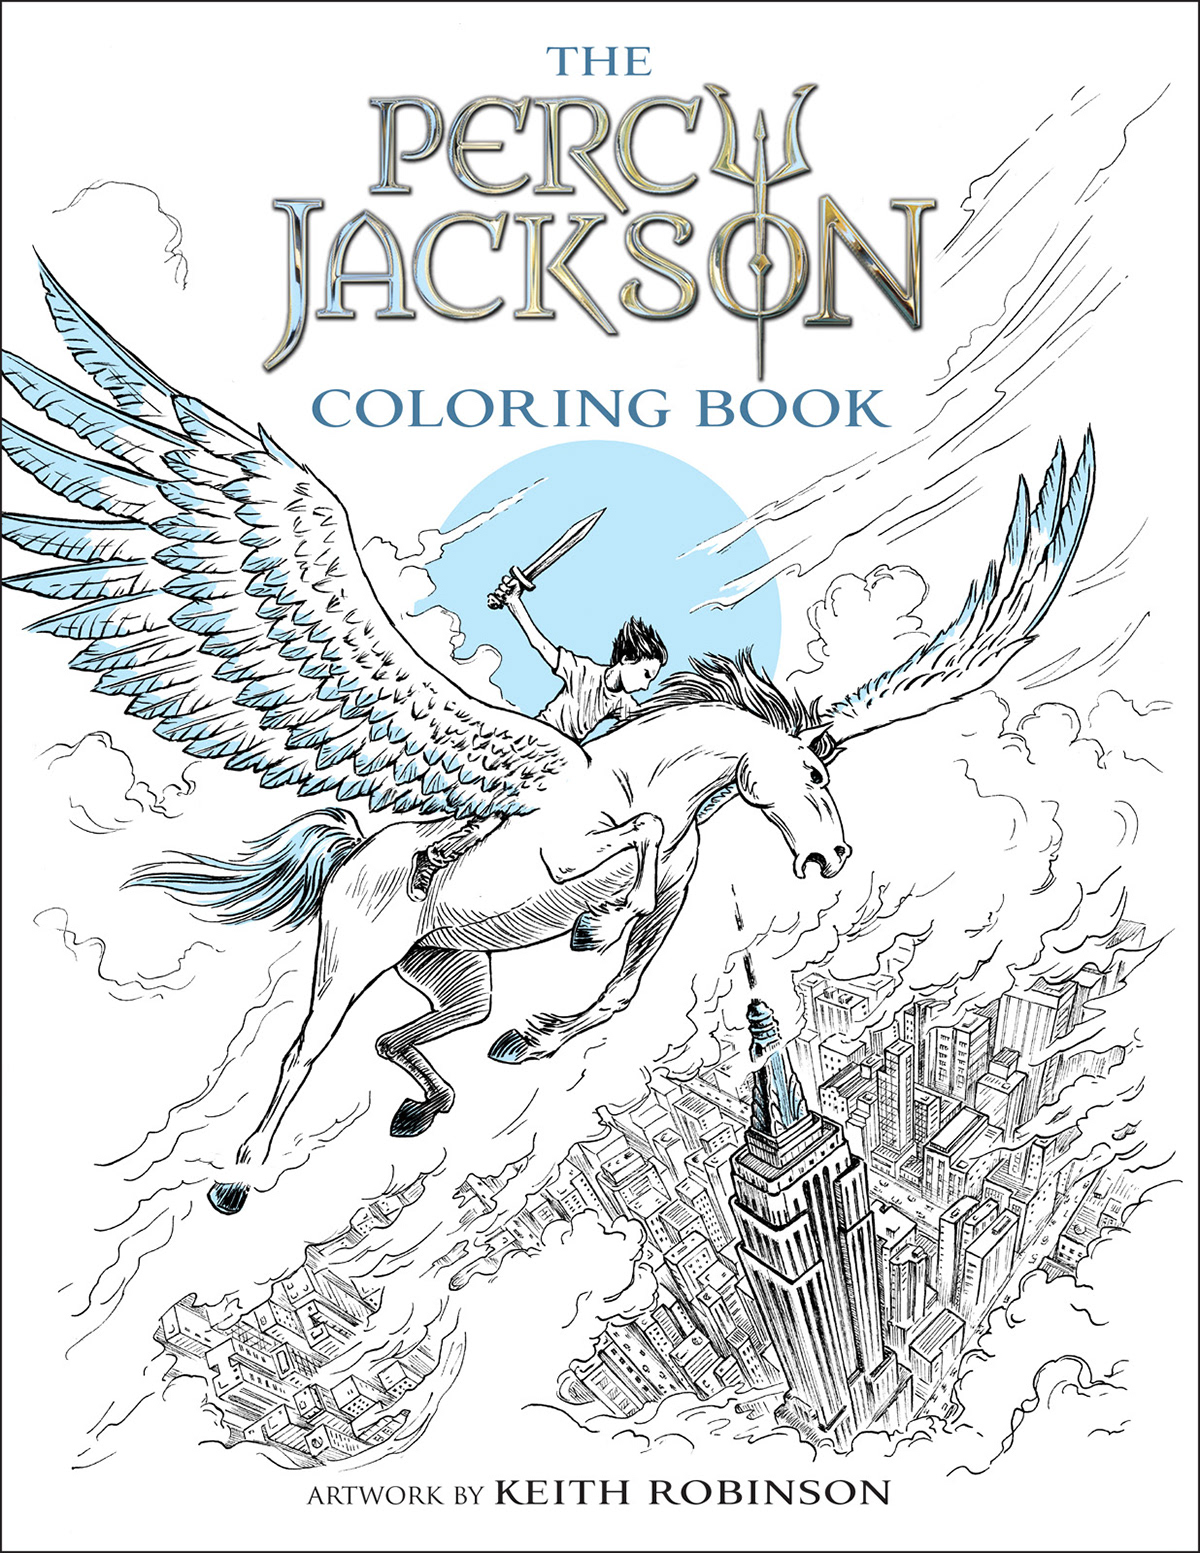 The Percy Jackson Colouring Book